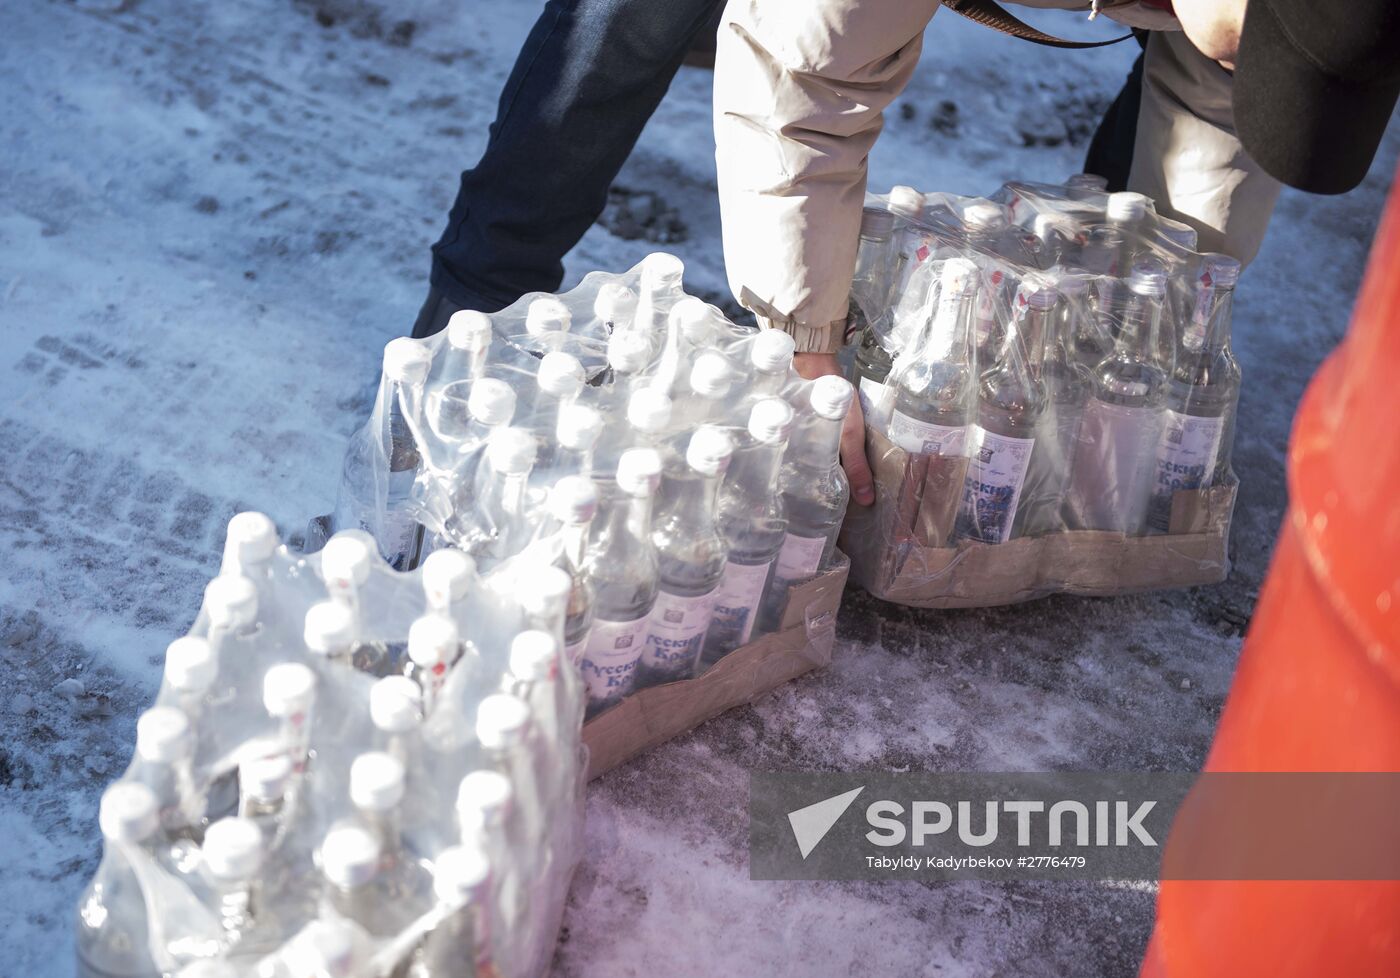 State services destroy counterfeit alcohol in Kirghizia